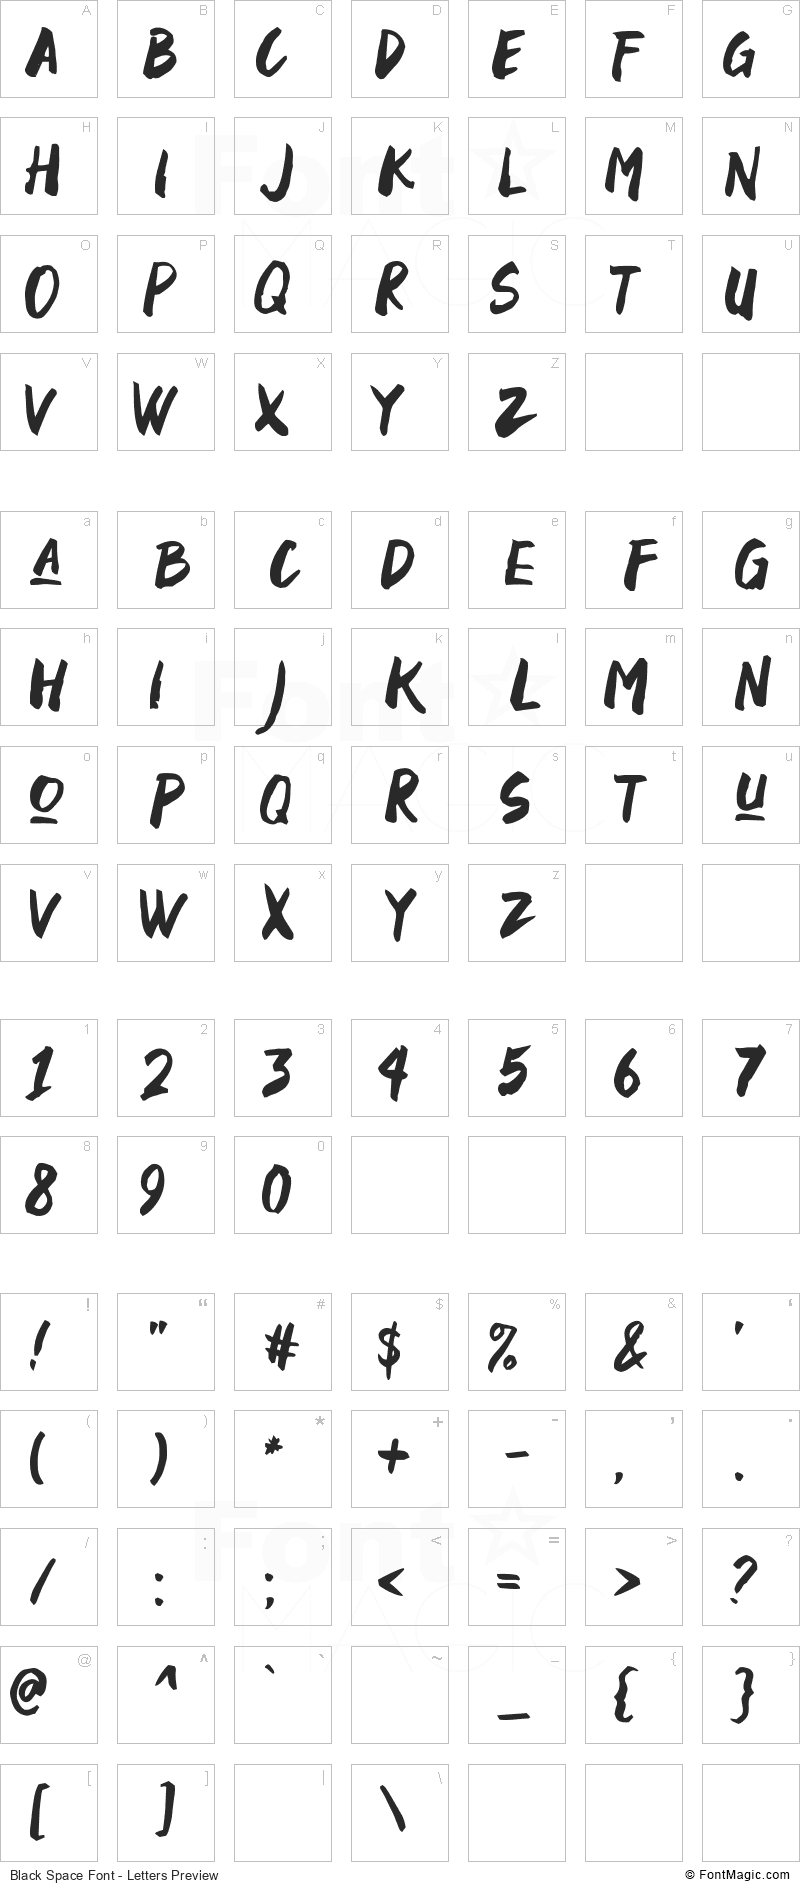 Black Space Font - All Latters Preview Chart